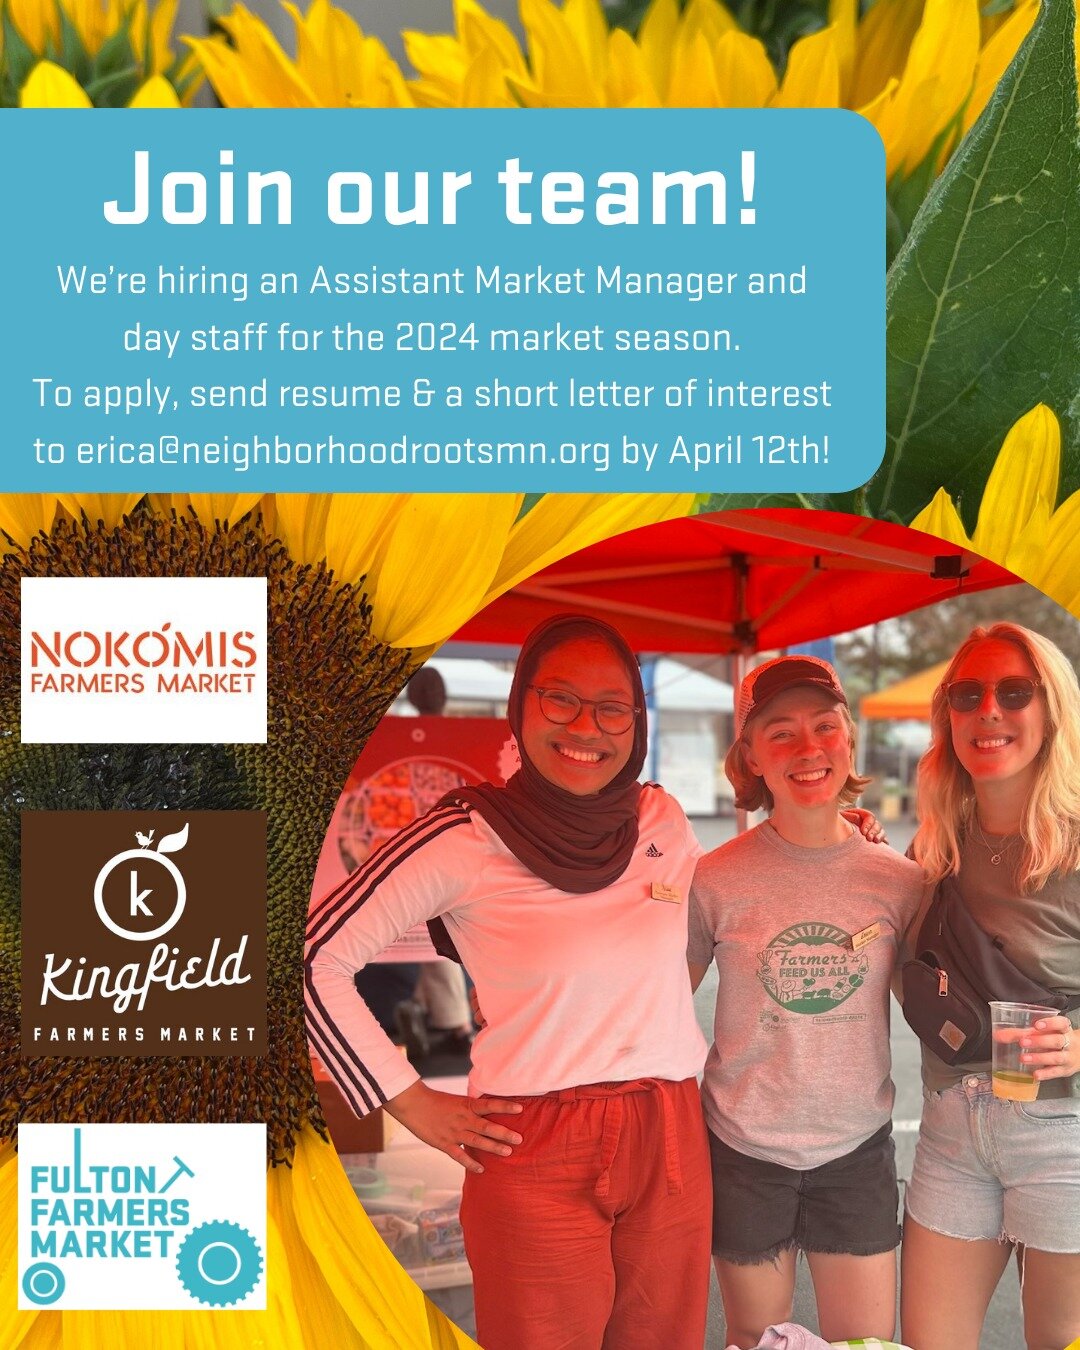 🌻 Neighborhood Roots is GROWING and we want YOU to join our team!
We're searching for passionate individuals to fill the roles of Assistant Market Manager and Day Staff for the 2024 market season at Fulton, Kingfield, and Nokomis Farmers Markets in 